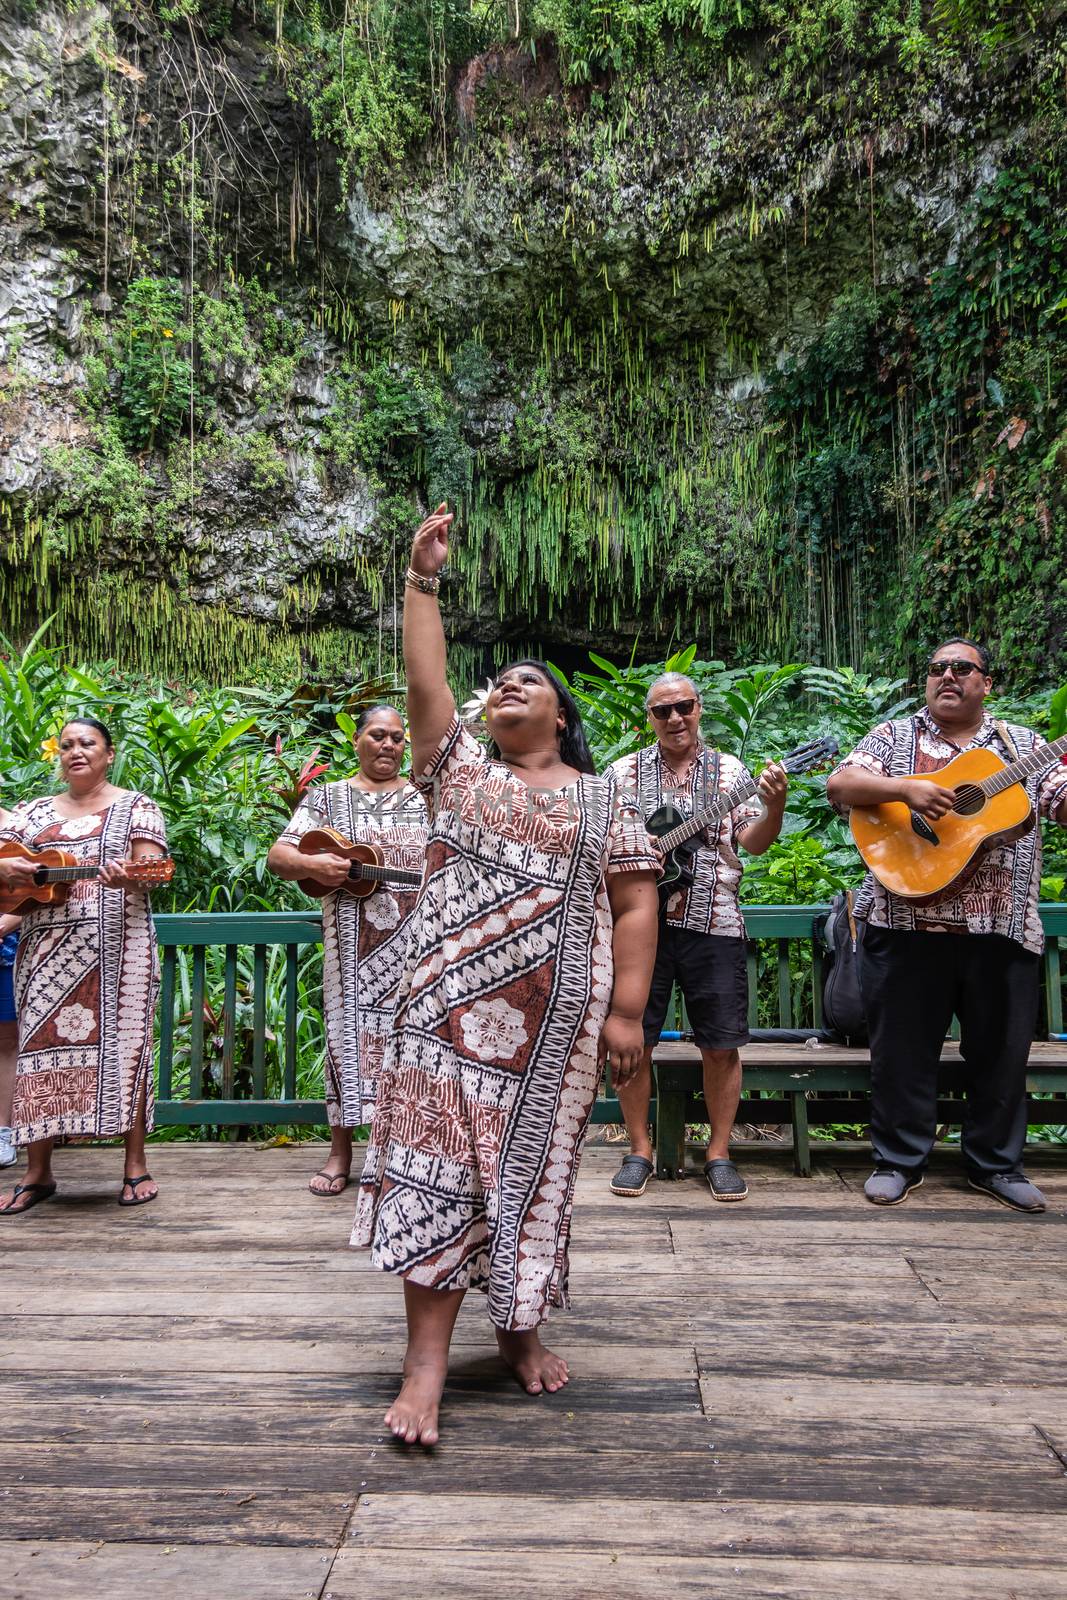 Kamokila Village, Kauai, Hawaii, USA. - January 16, 2020: Local folk band performs on stage in front of Fern Grotto. Female singer in front. Green background.